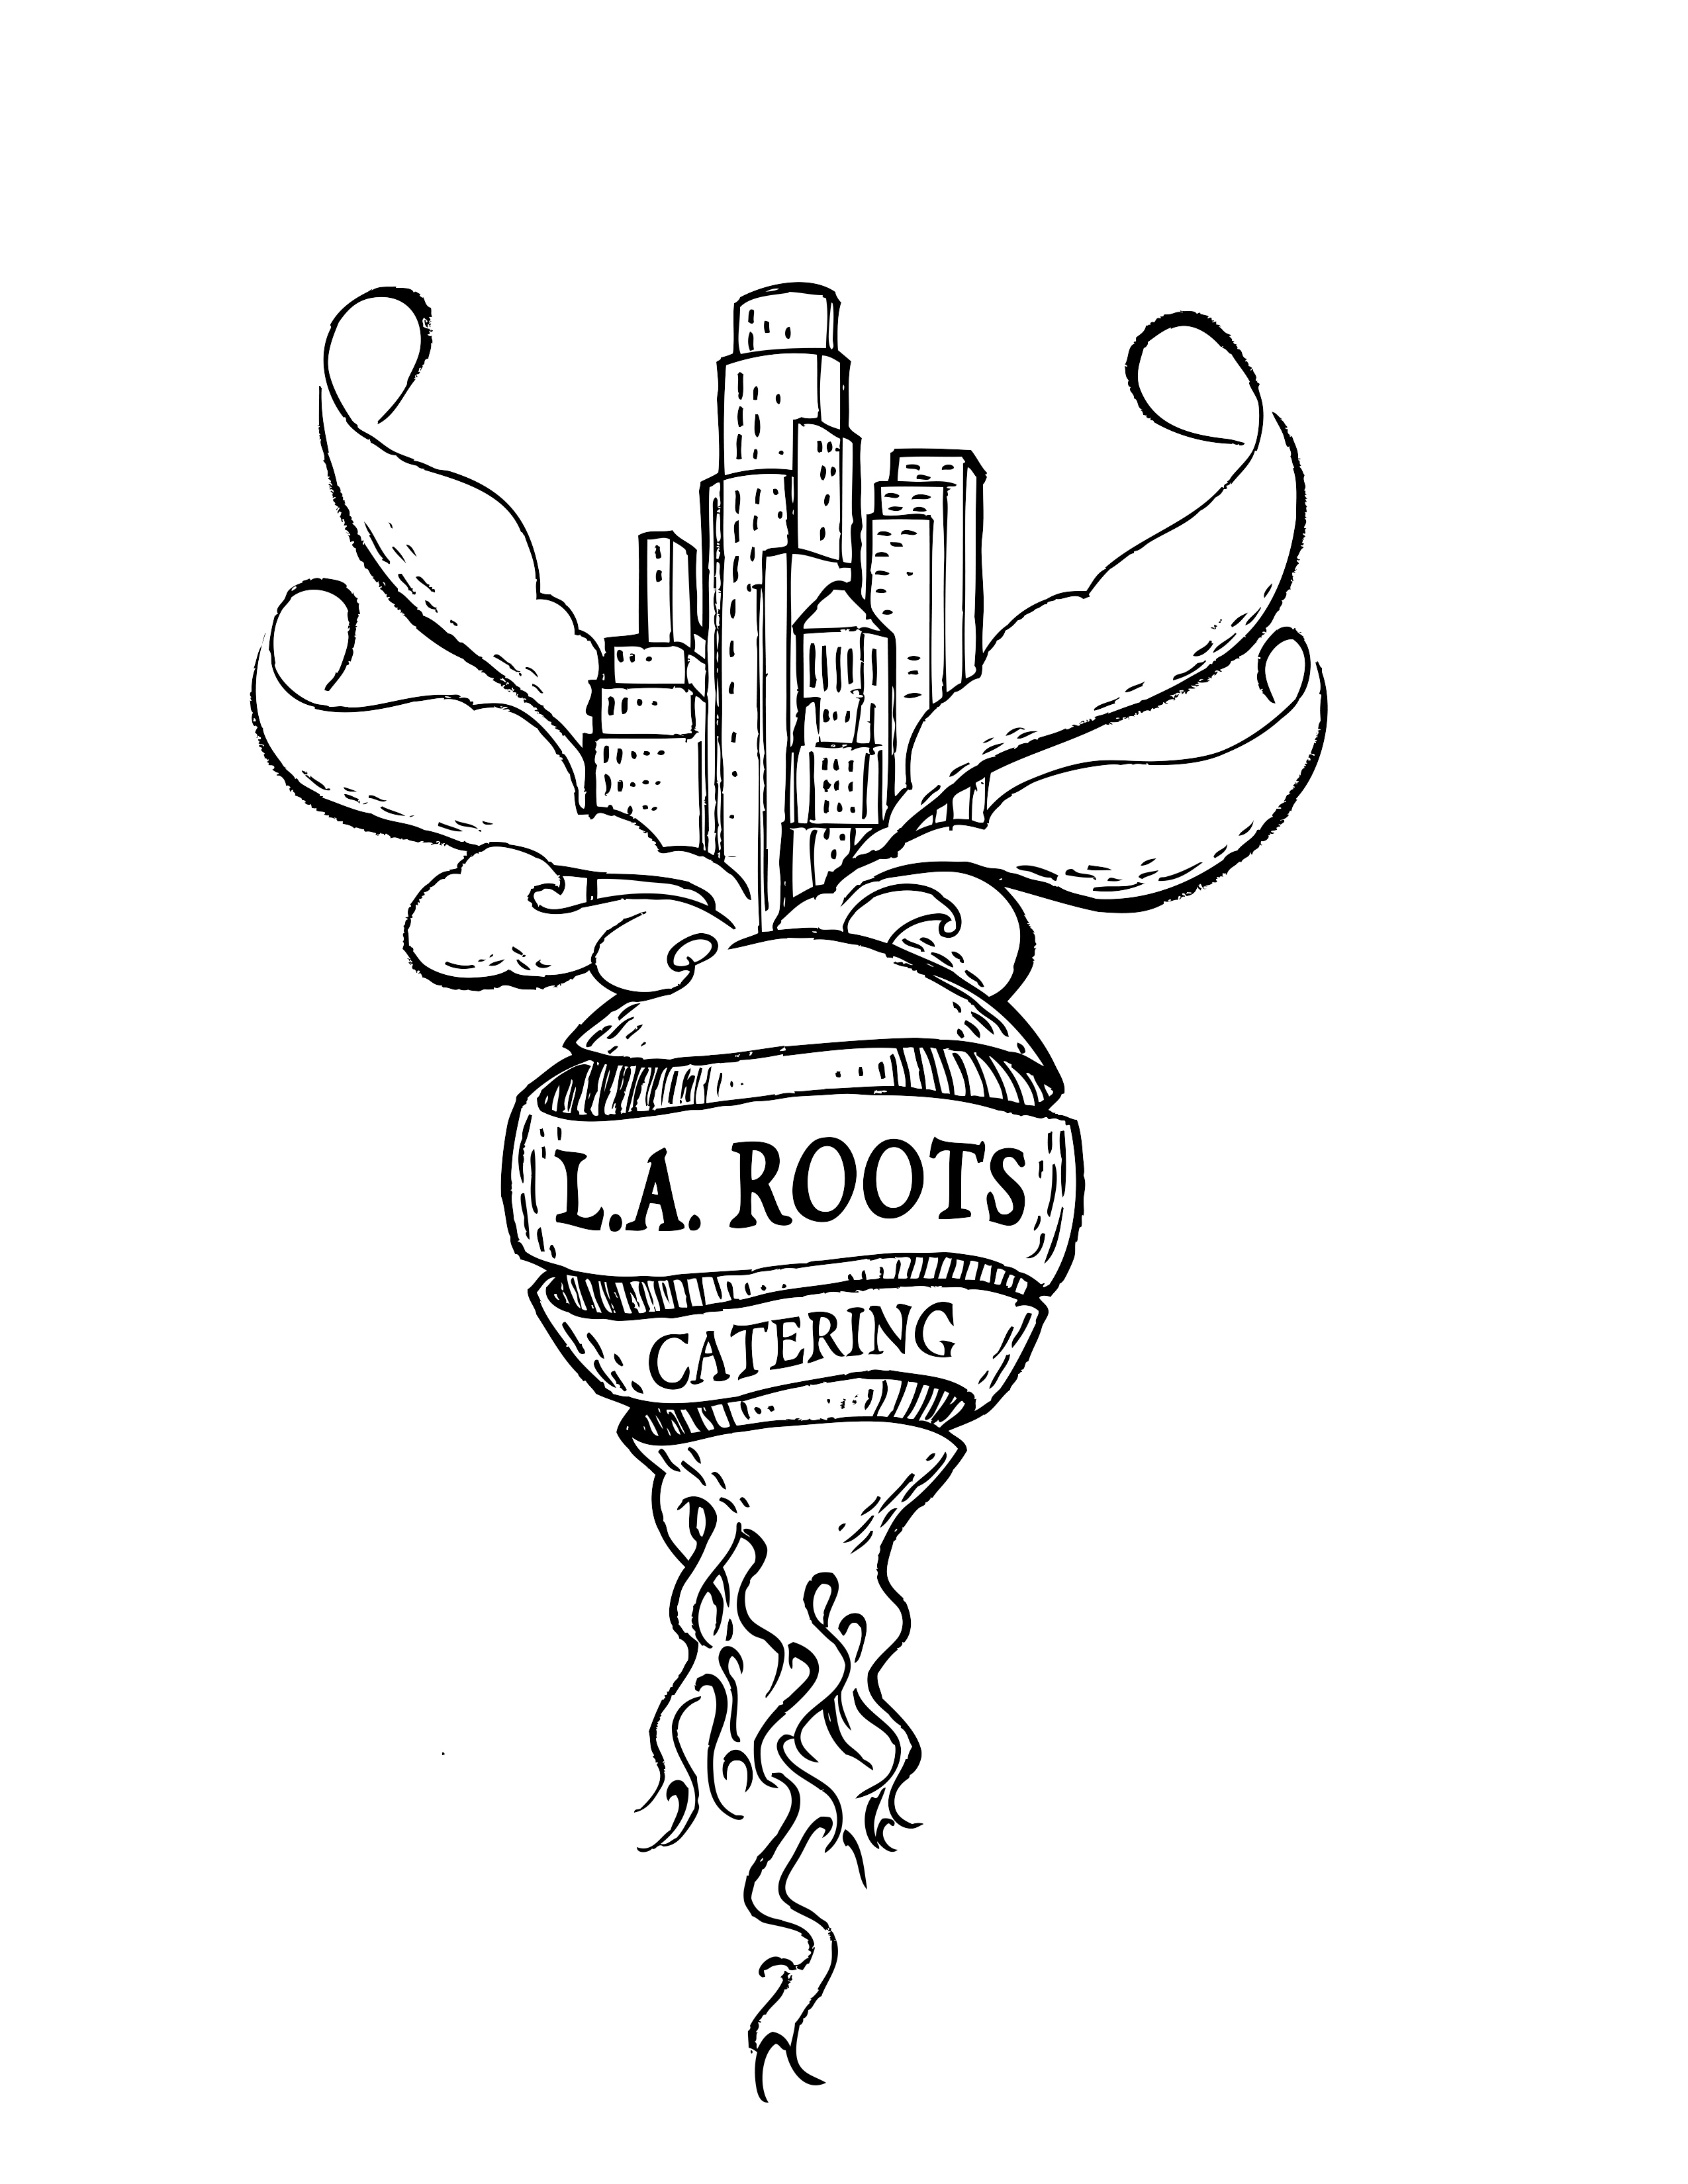 L.A.Roots Catering